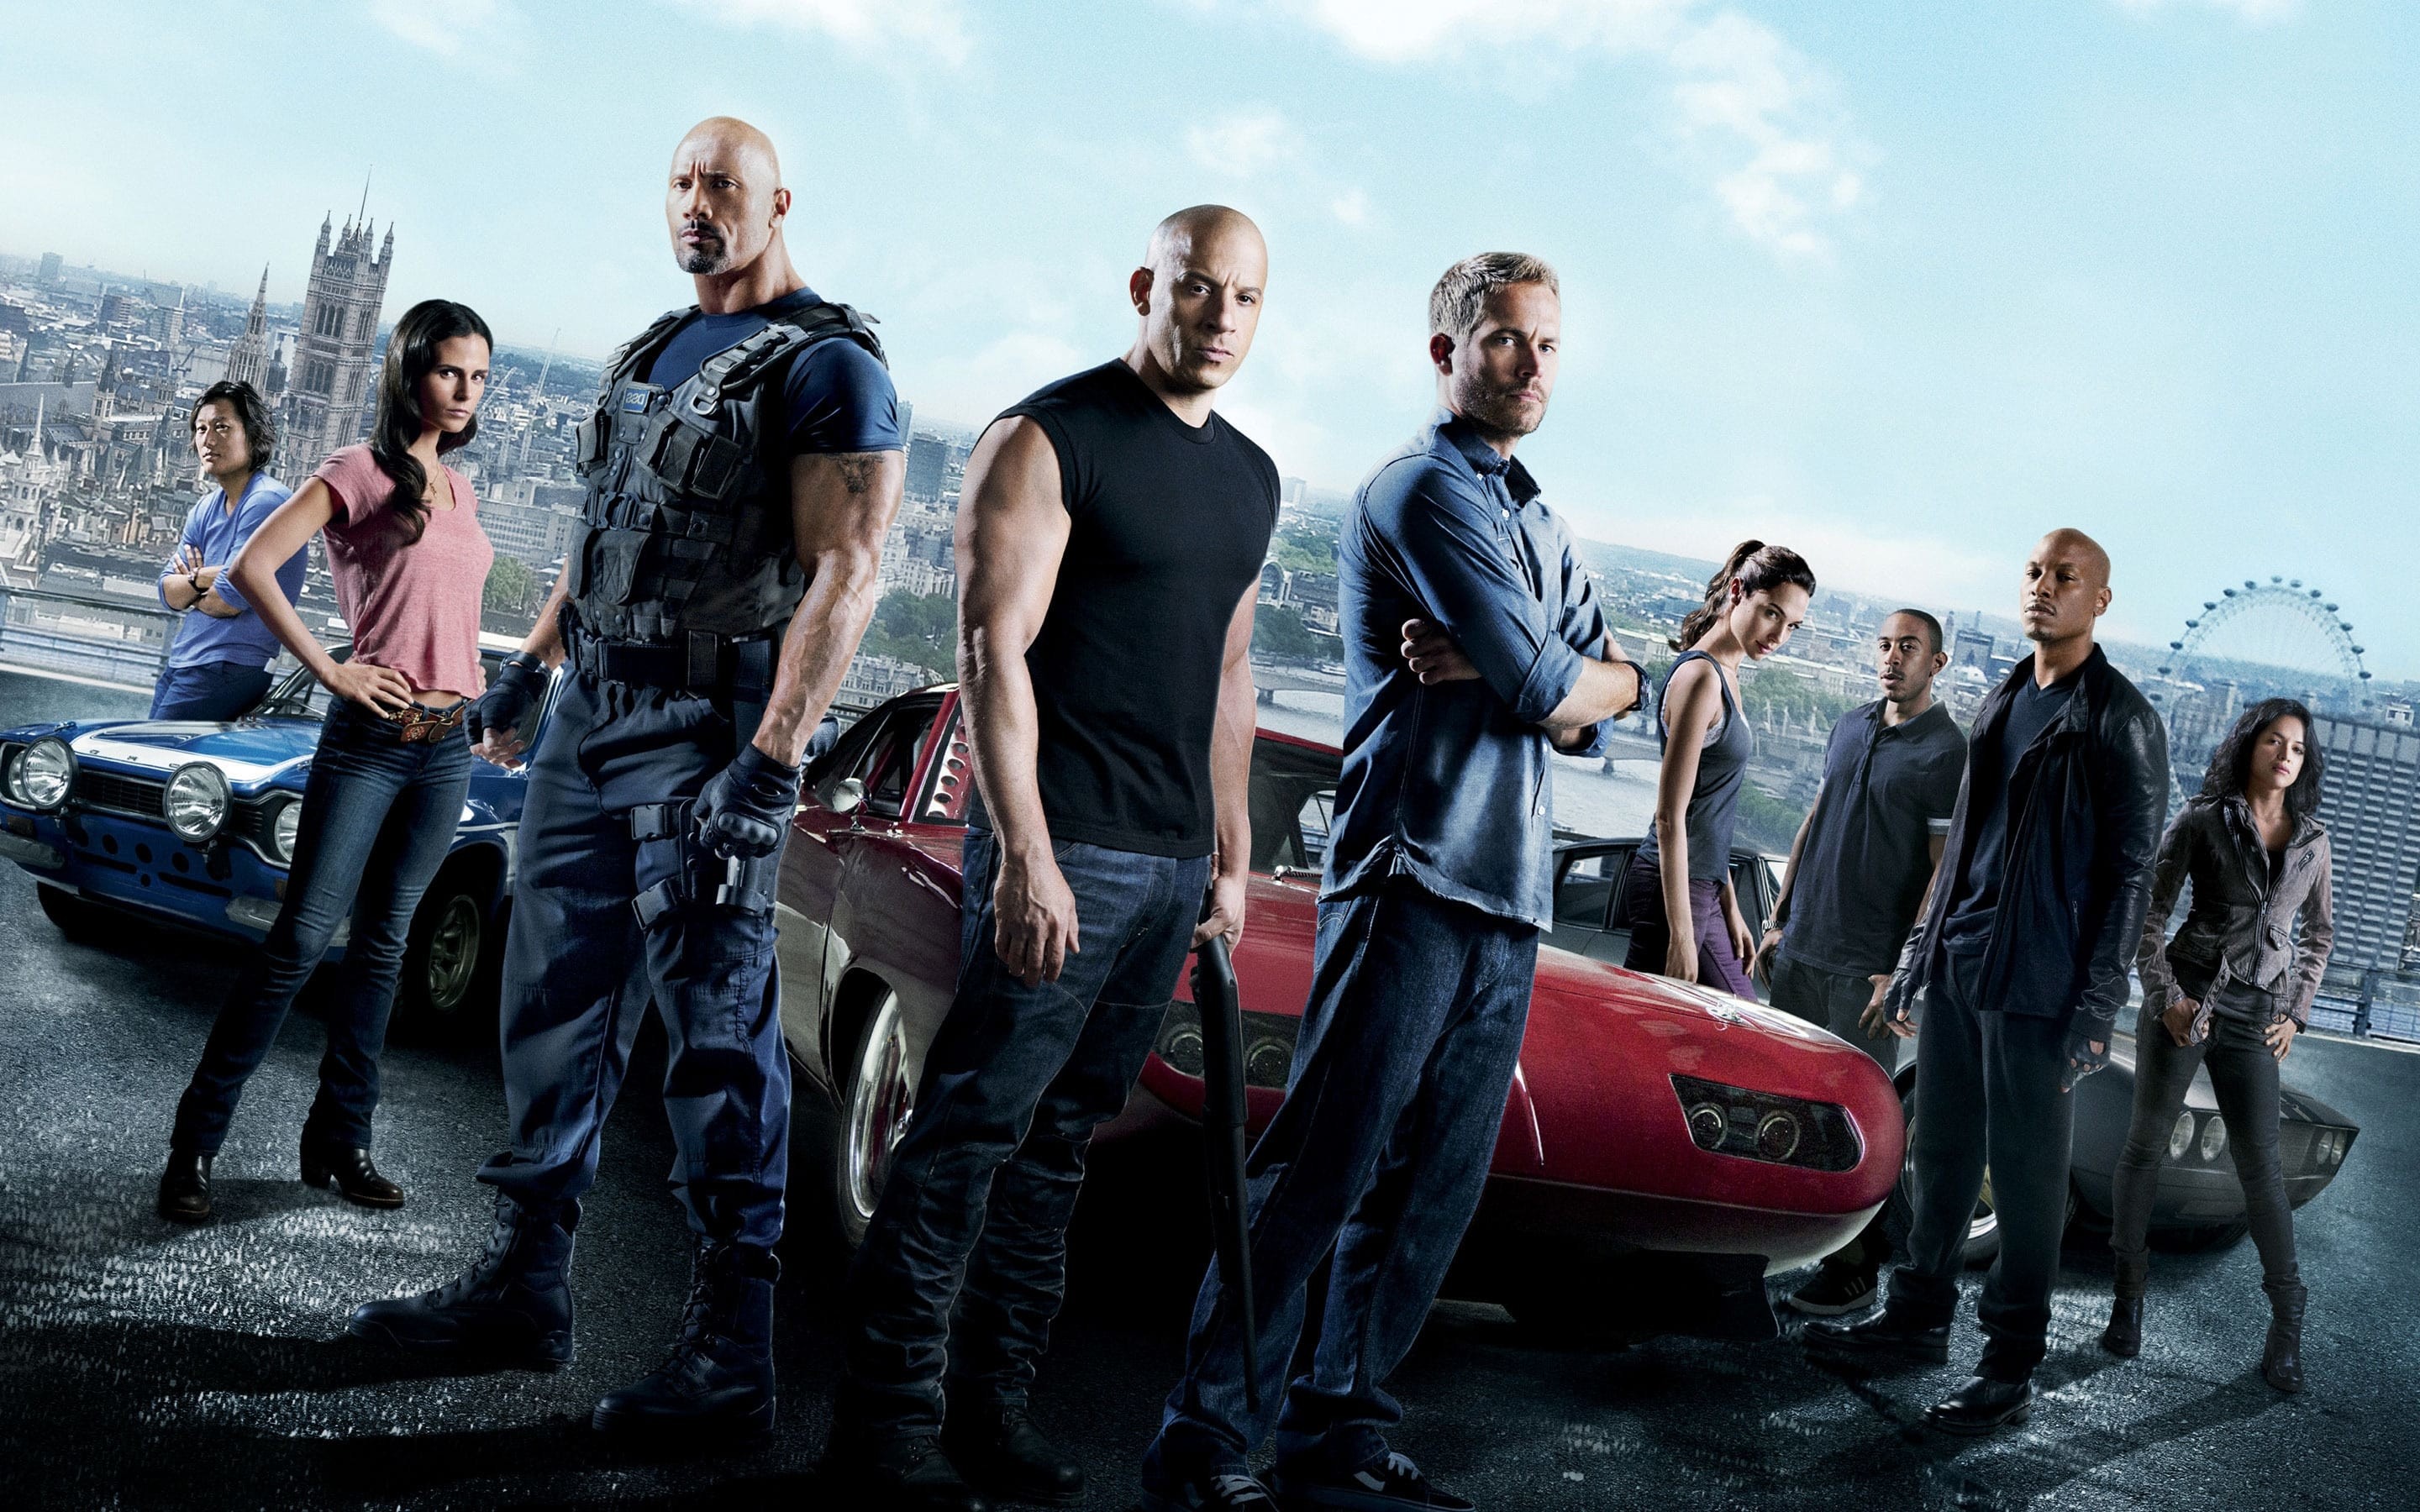 2880x1800 Fast & Furious 7 widescreen wallpapers Fast & Furious 7 Pictures